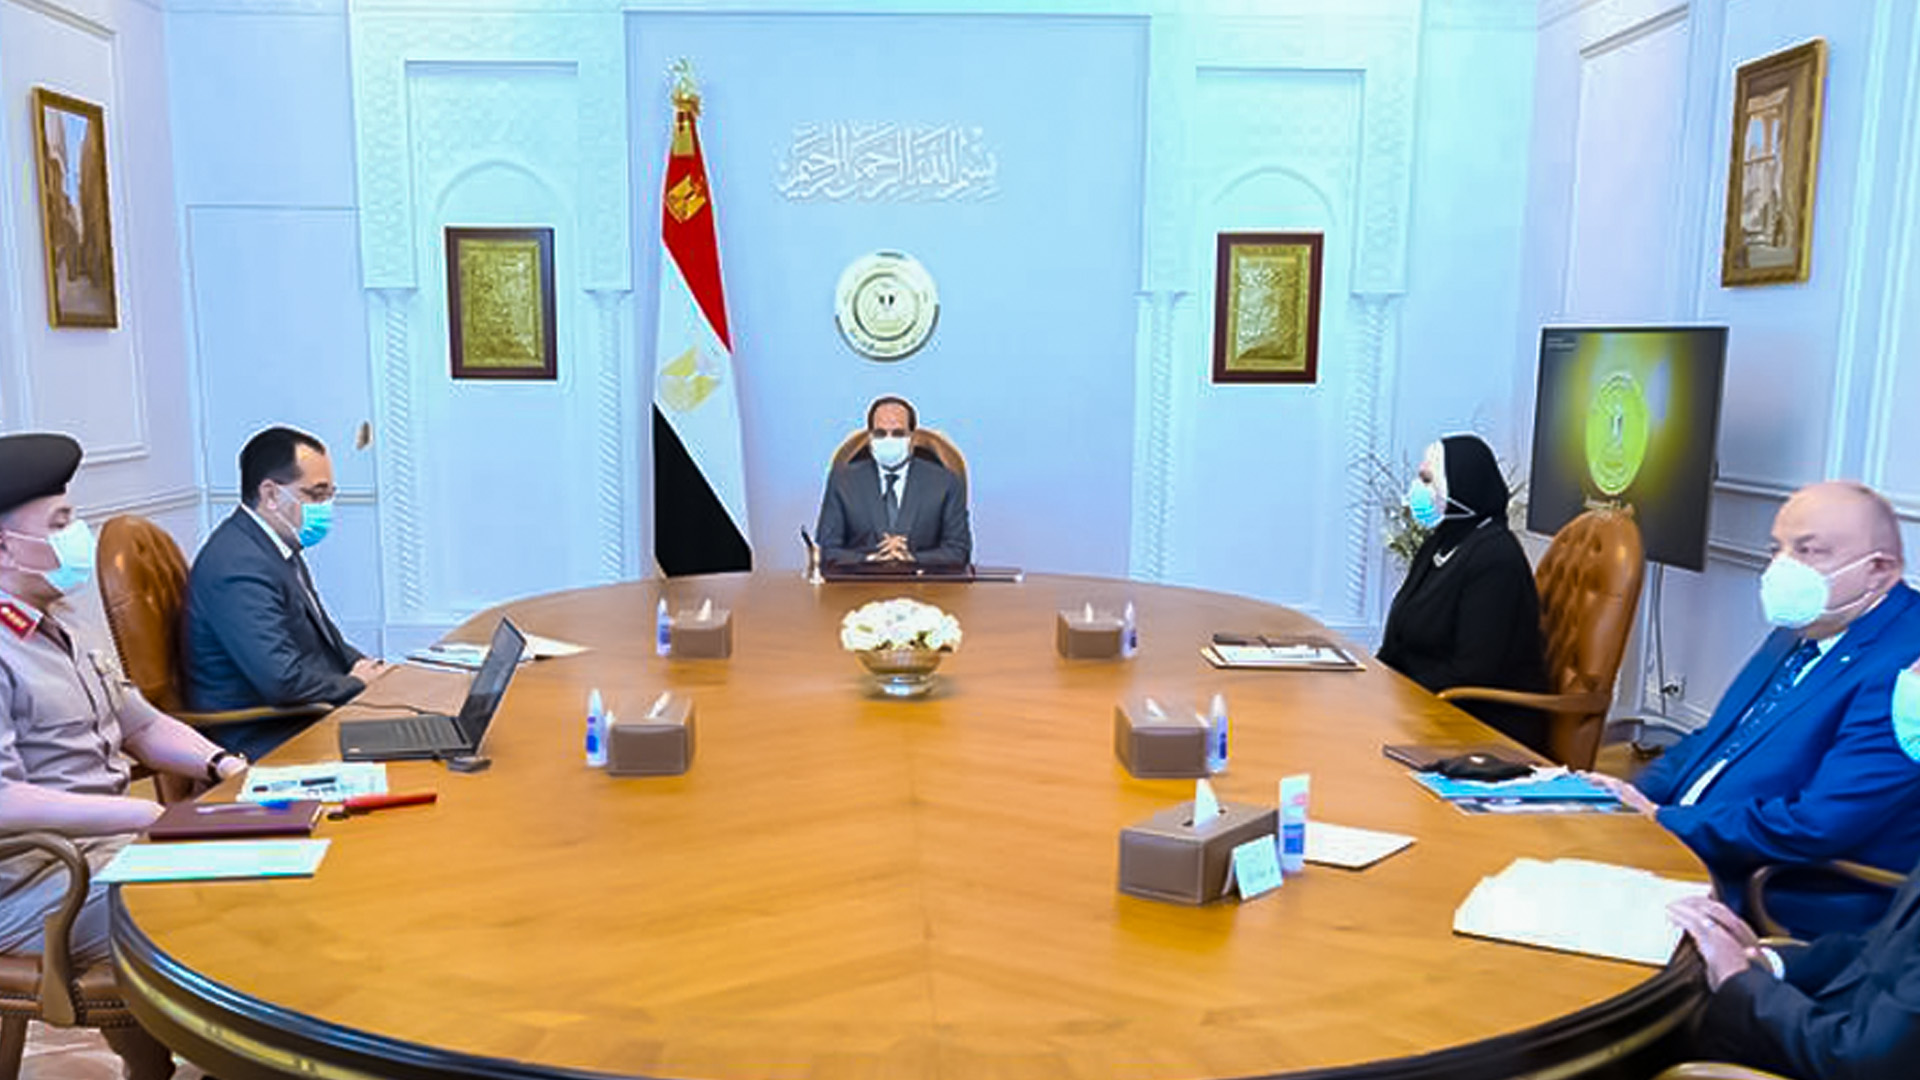 El-Sisi follows up on the infant formula industry in Egypt